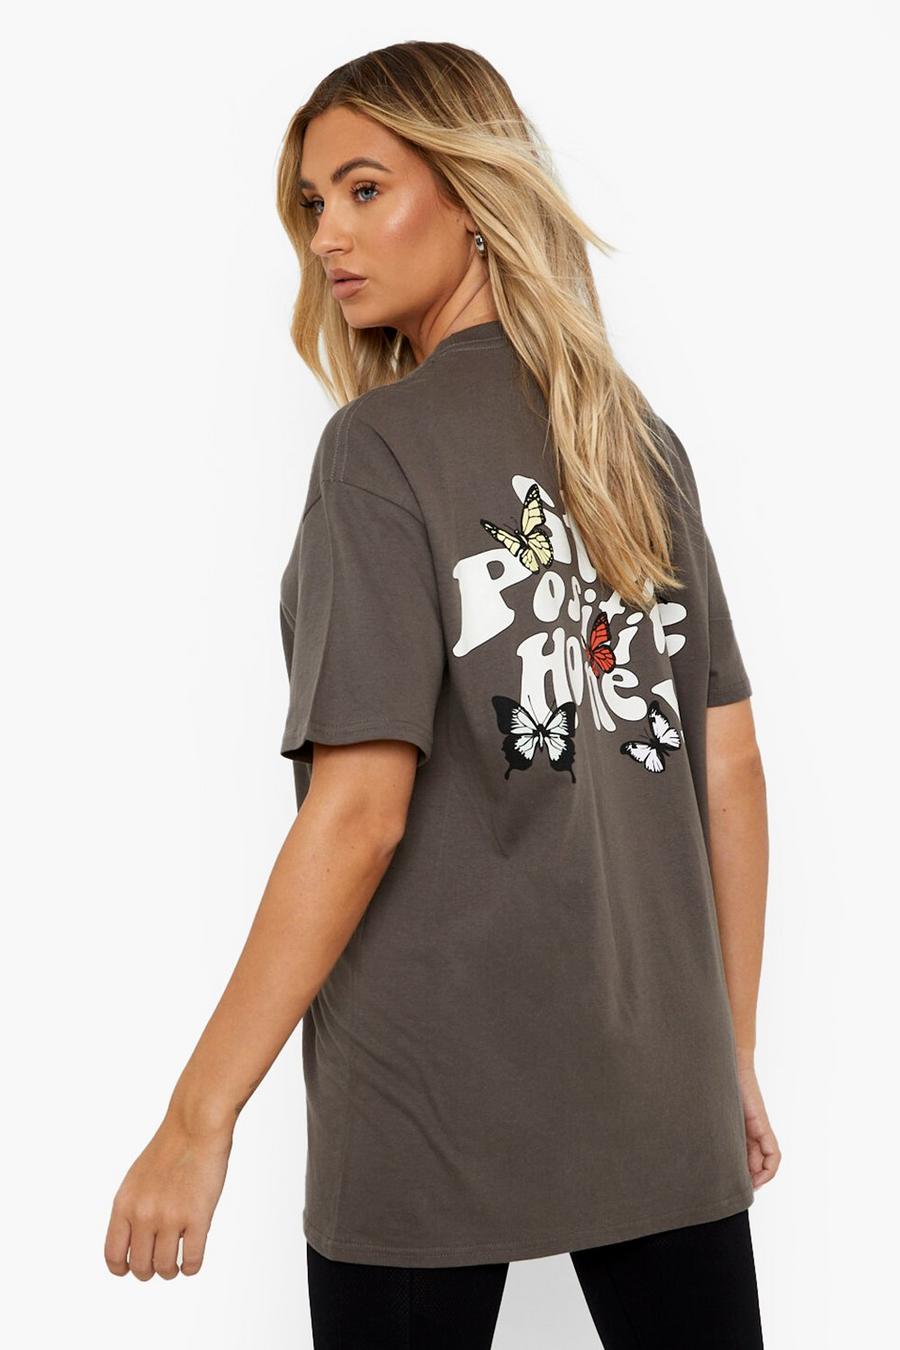 Charcoal grey Oversized Stay Positive Back Print T-Shirt